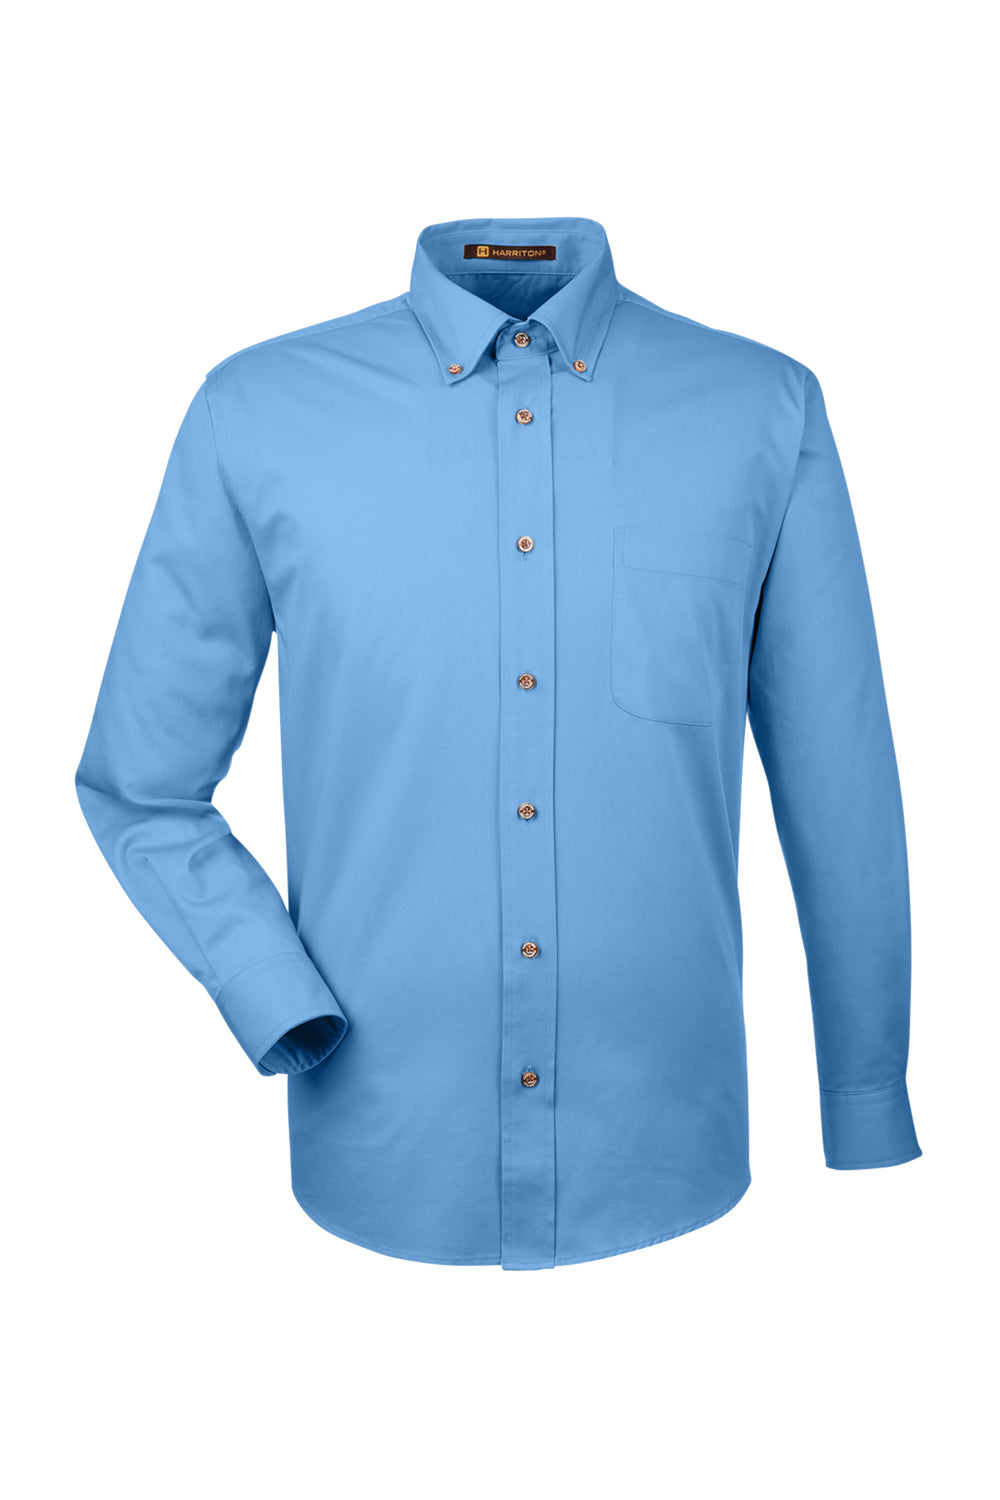 Harriton M500/M500T Wrinkle Resistant Long Sleeve Button Down Shirt w/ Pocket Light College Blue Flat Front